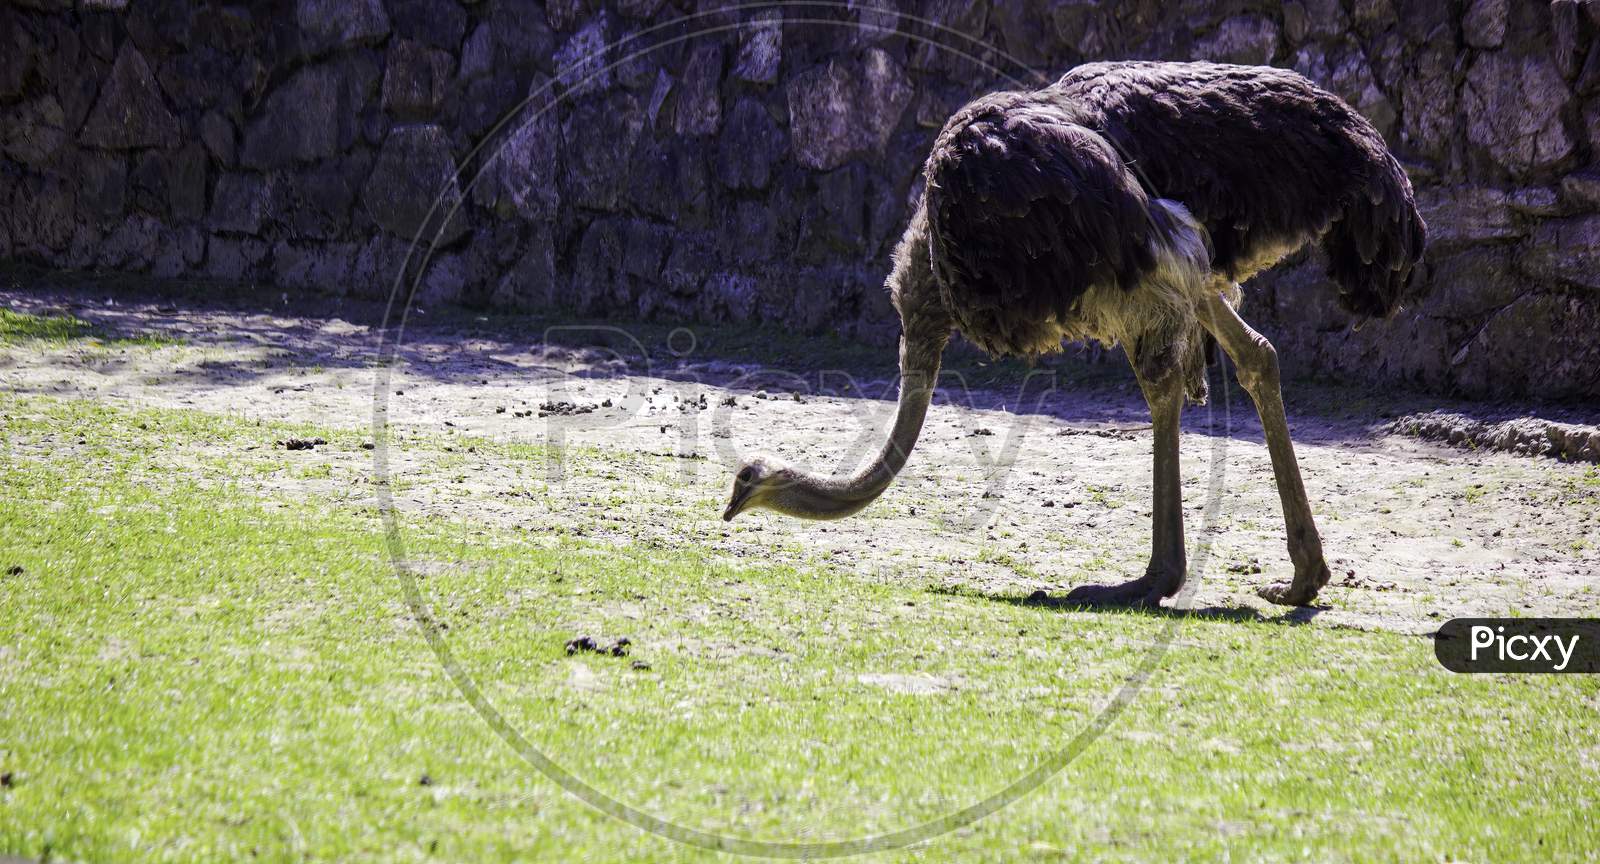 An Ostrich Bows Down Looking For Food In The Grass, Captured In Zoo Of Krakow, Poland - Europe